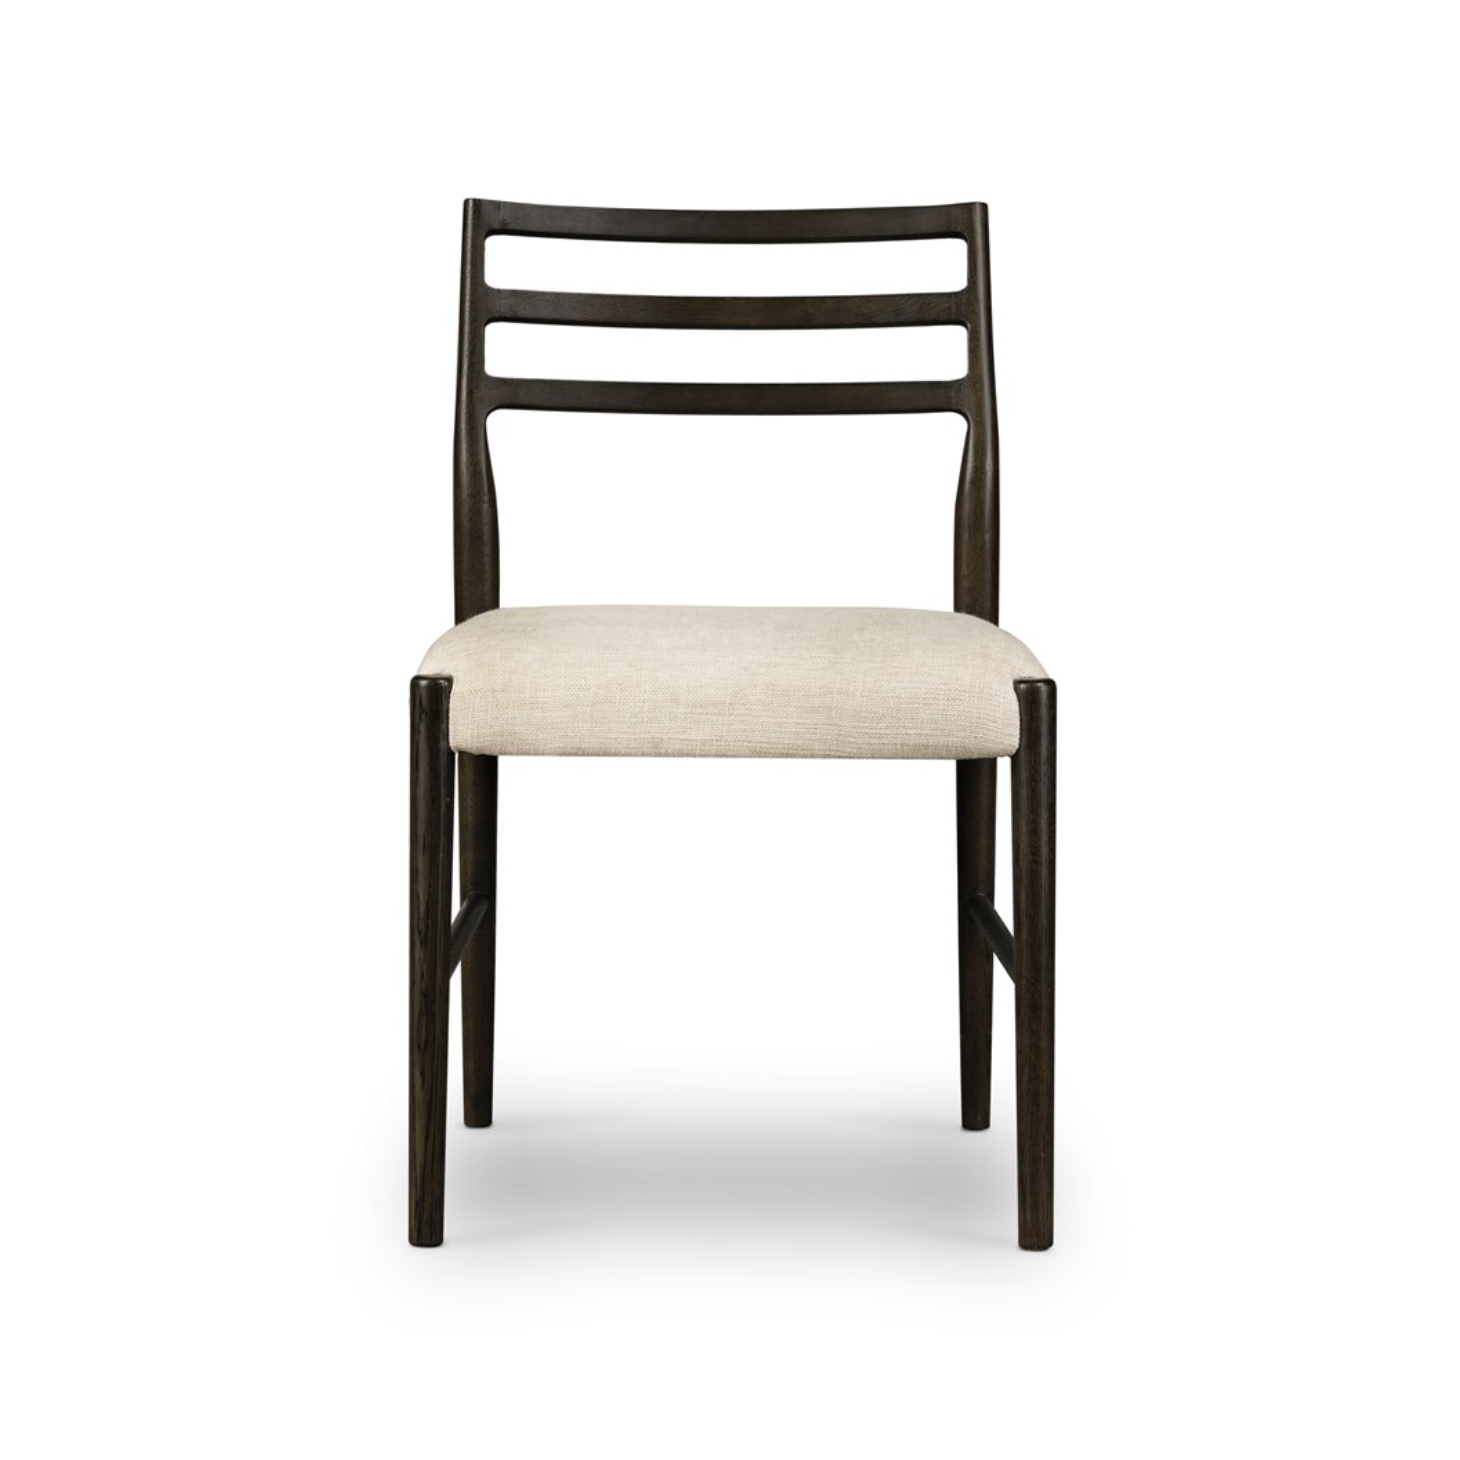 Glenmore Dining Chair - Carbon